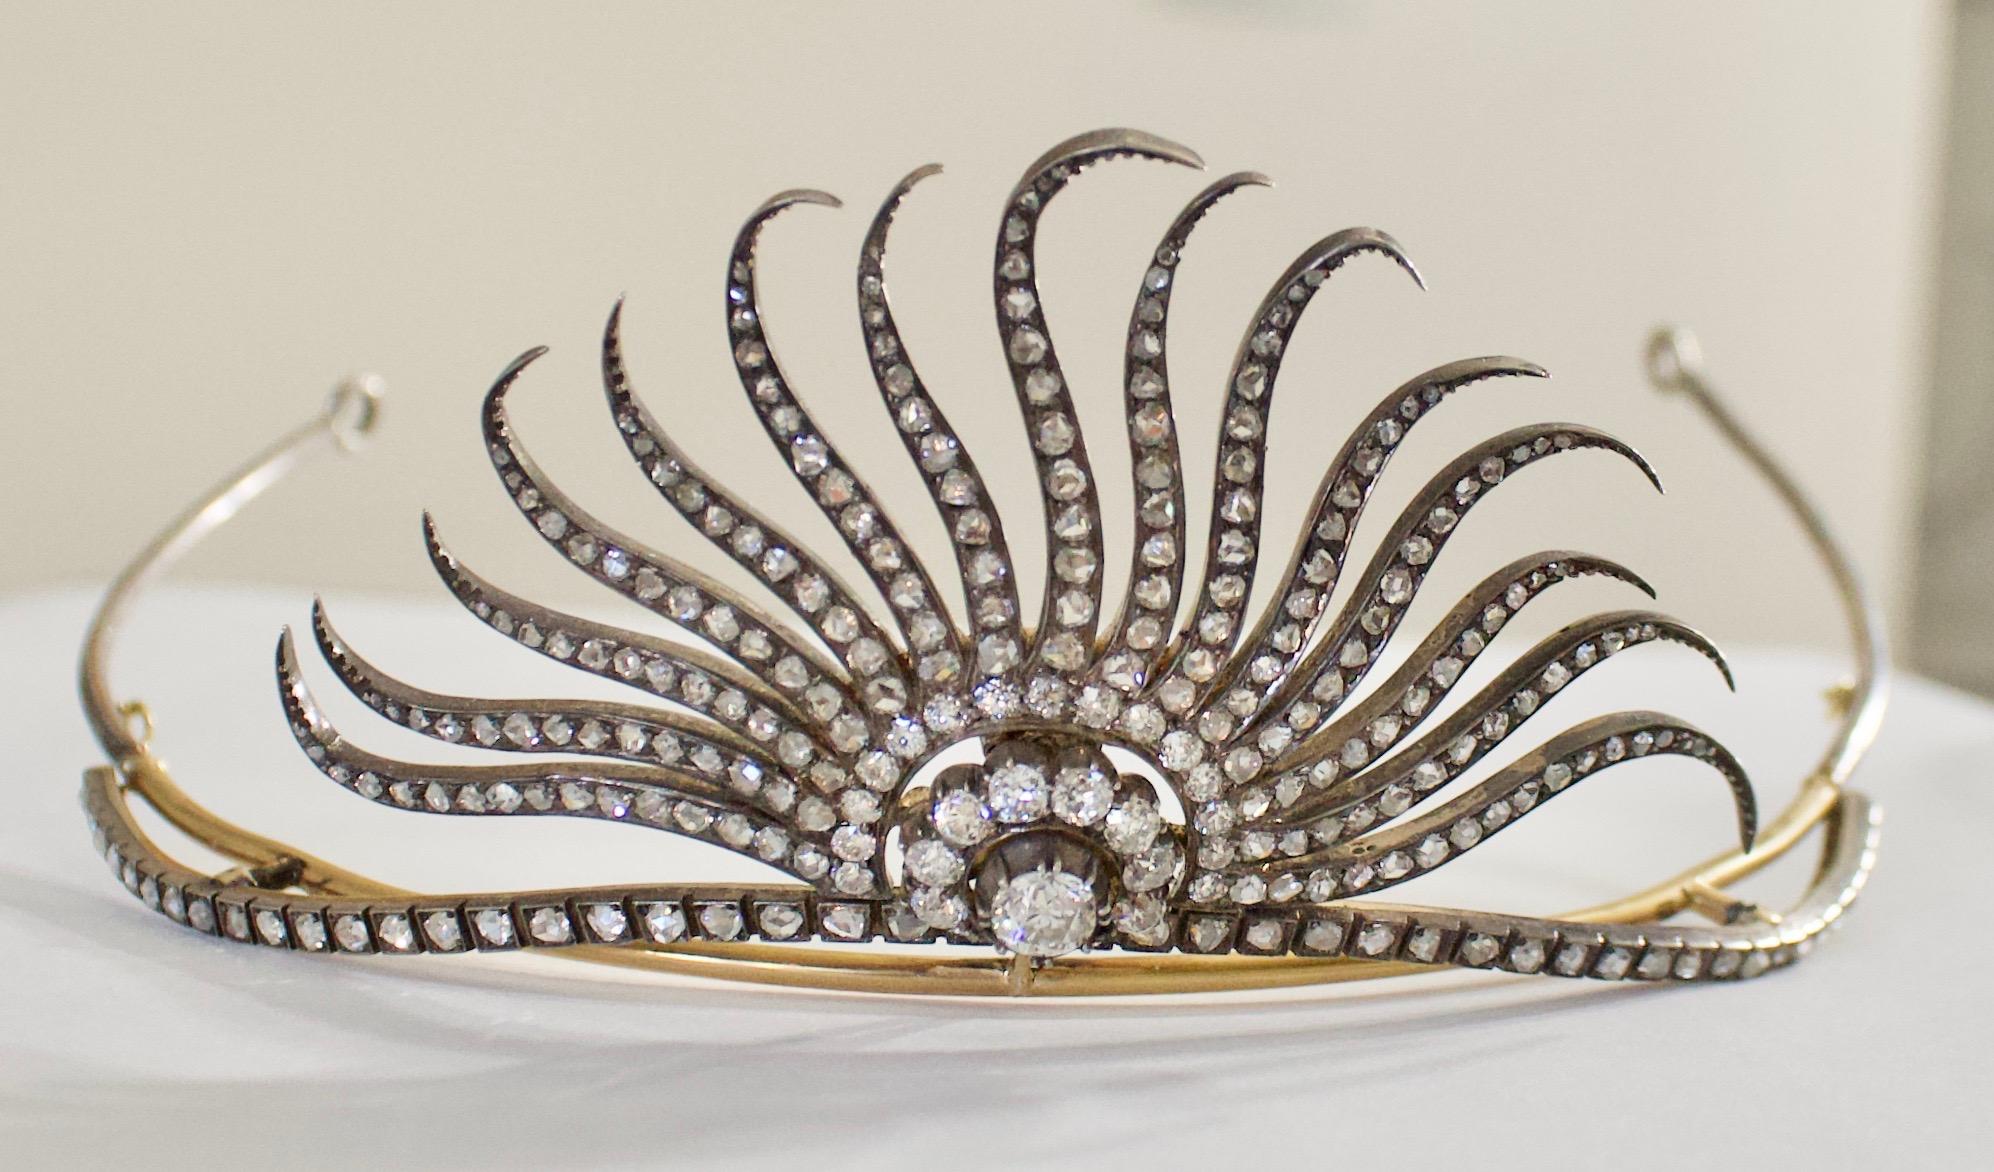 Diamond Tiara in Yellow Gold and Silver and Metal  7.10 Carats Circa 1890 For Royalty Only
Once You Have Stated You Are Royalty This Amazing Tiara Can Be Yours
One Old Mine Cut Cut Diamond Weighing .95 Carats Approximately 
Eight Old Mine Cut Cut